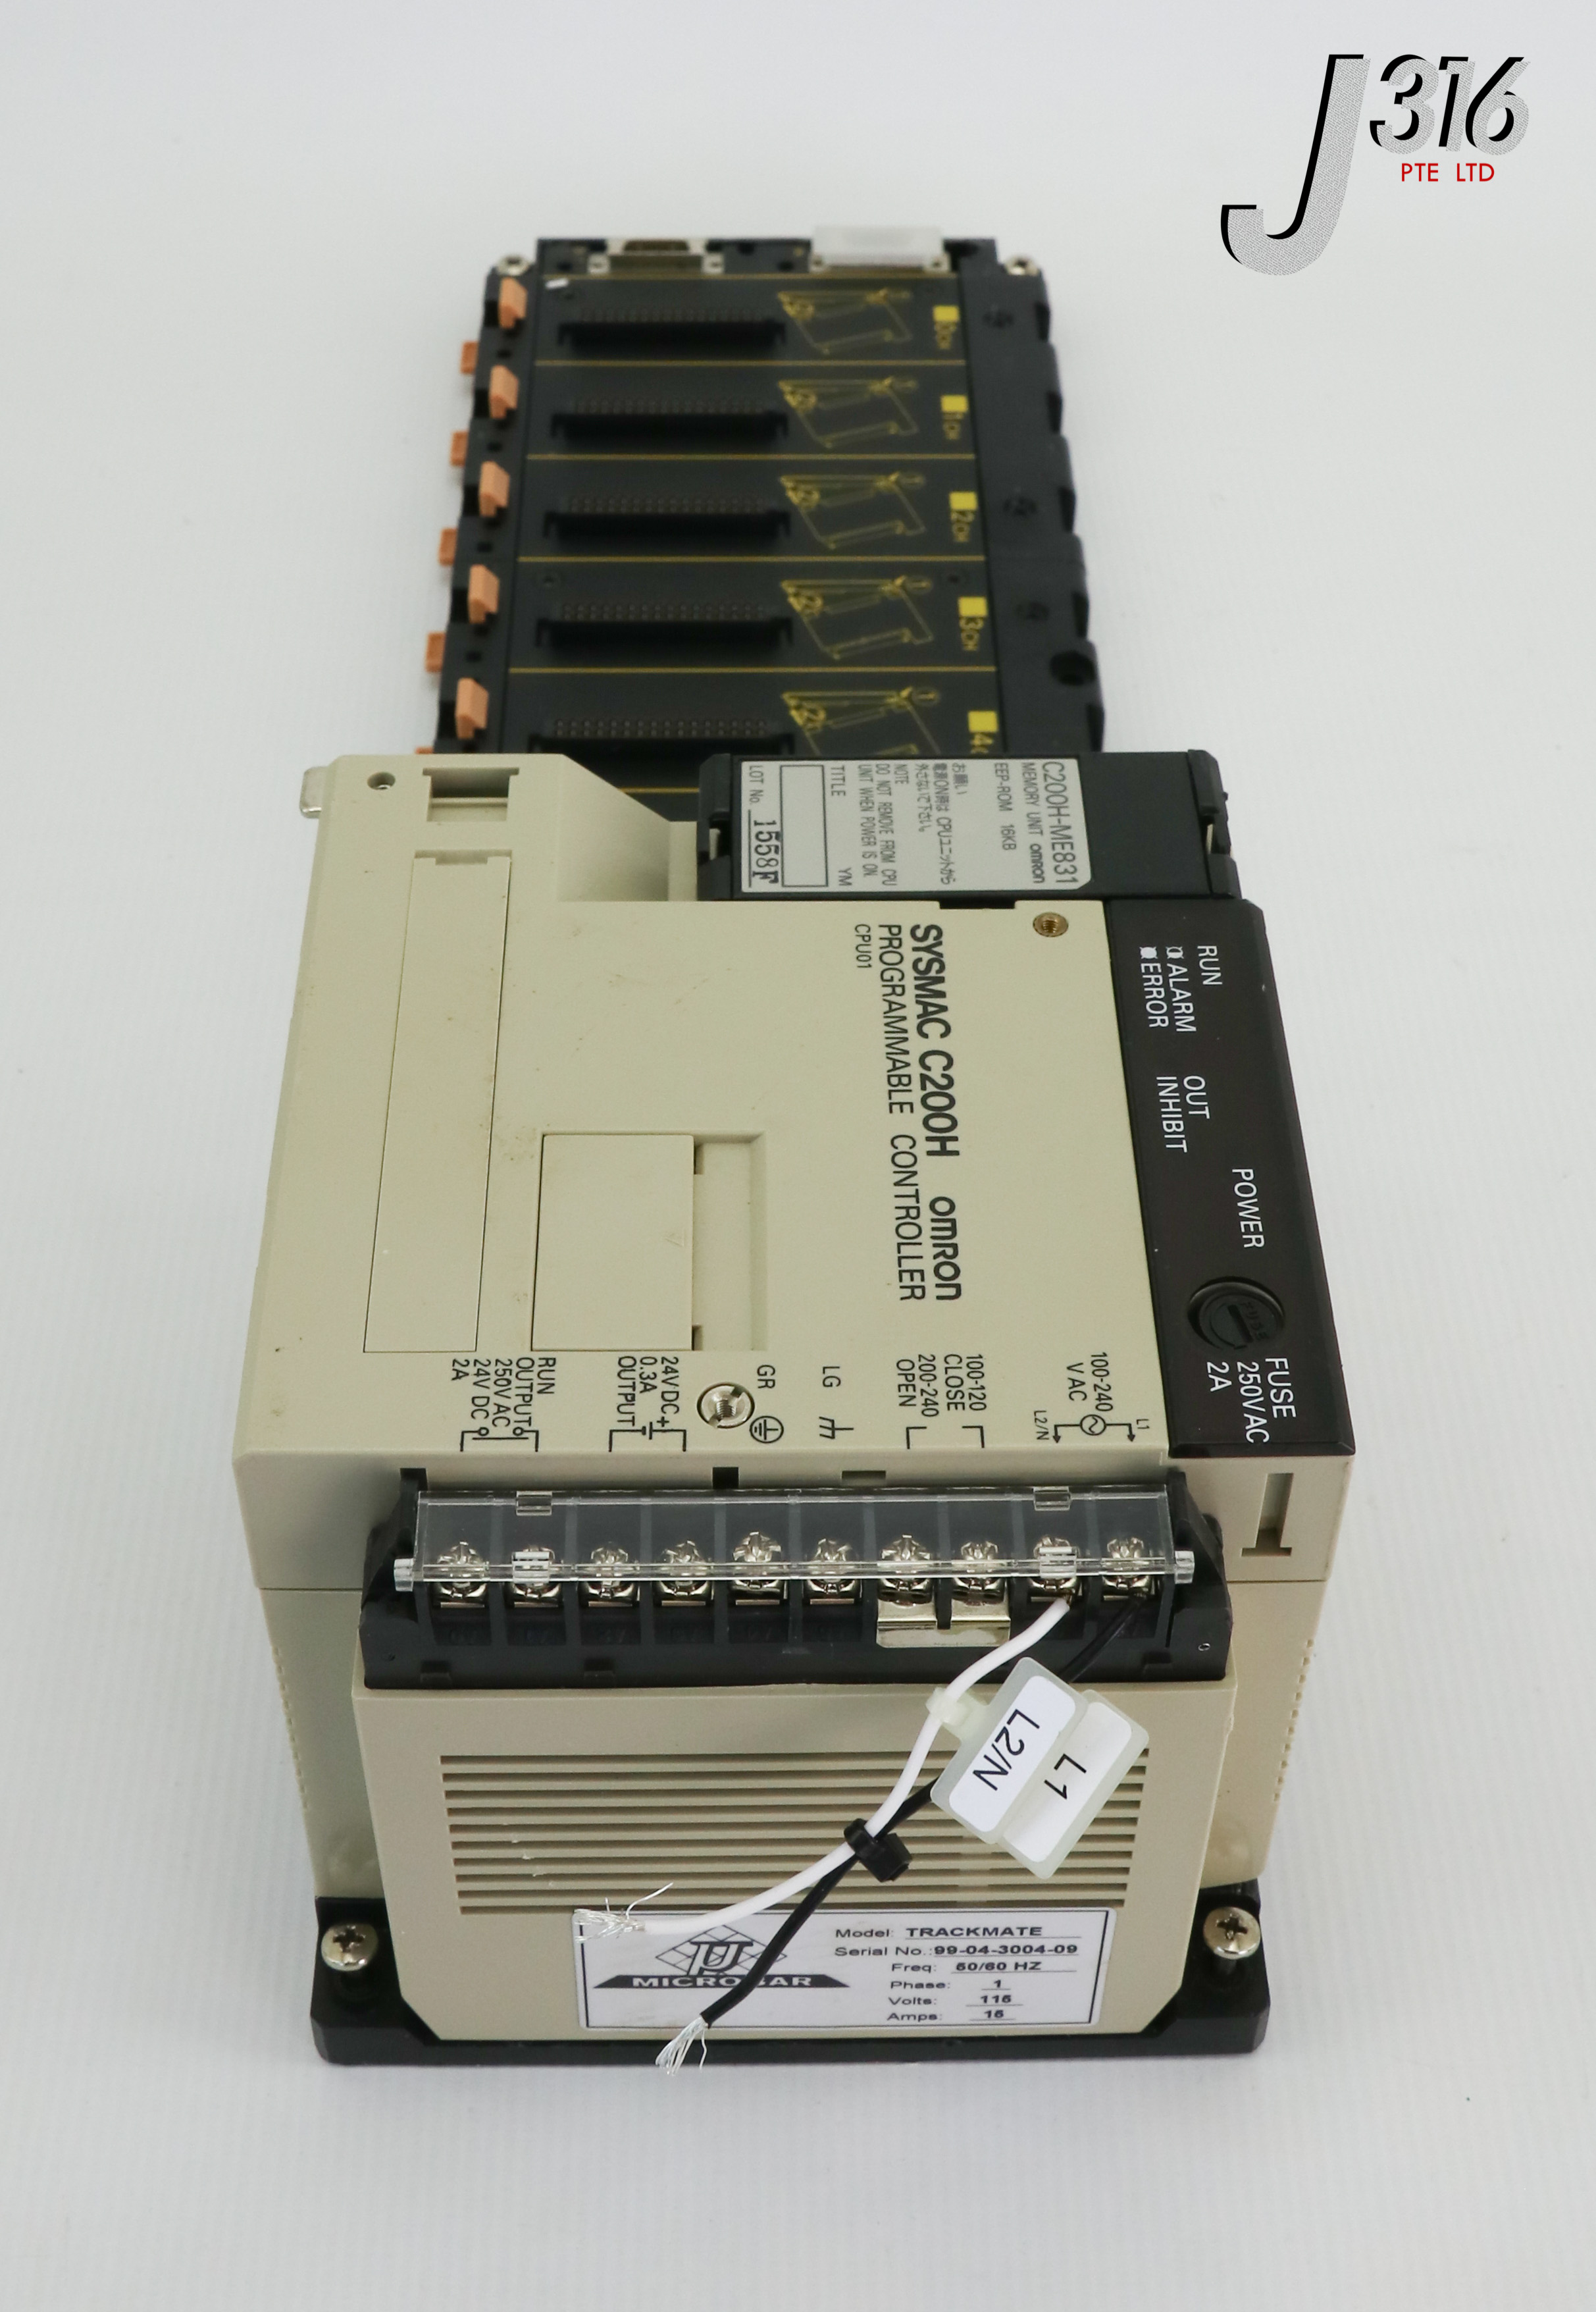 23240 OMRON SYSMAC C200H PROGRAMMABLE CONTROLLER W/ CPU BASE UNIT